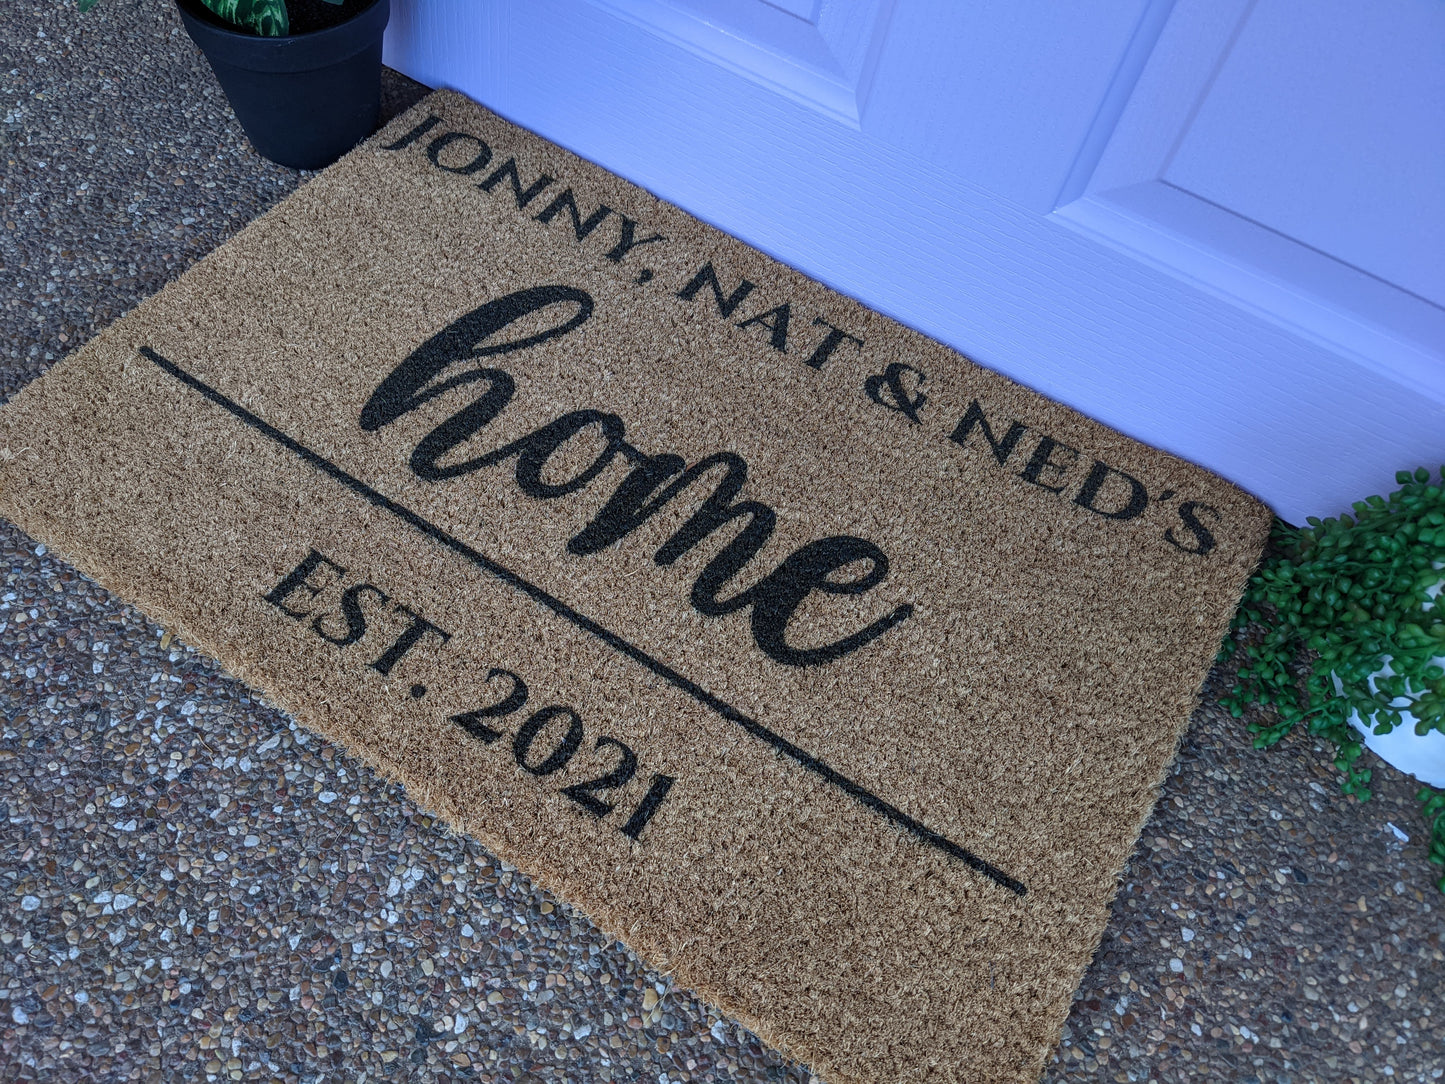 Personalised Home with a date | Personalised Doormat - Personalised Doormat Australia